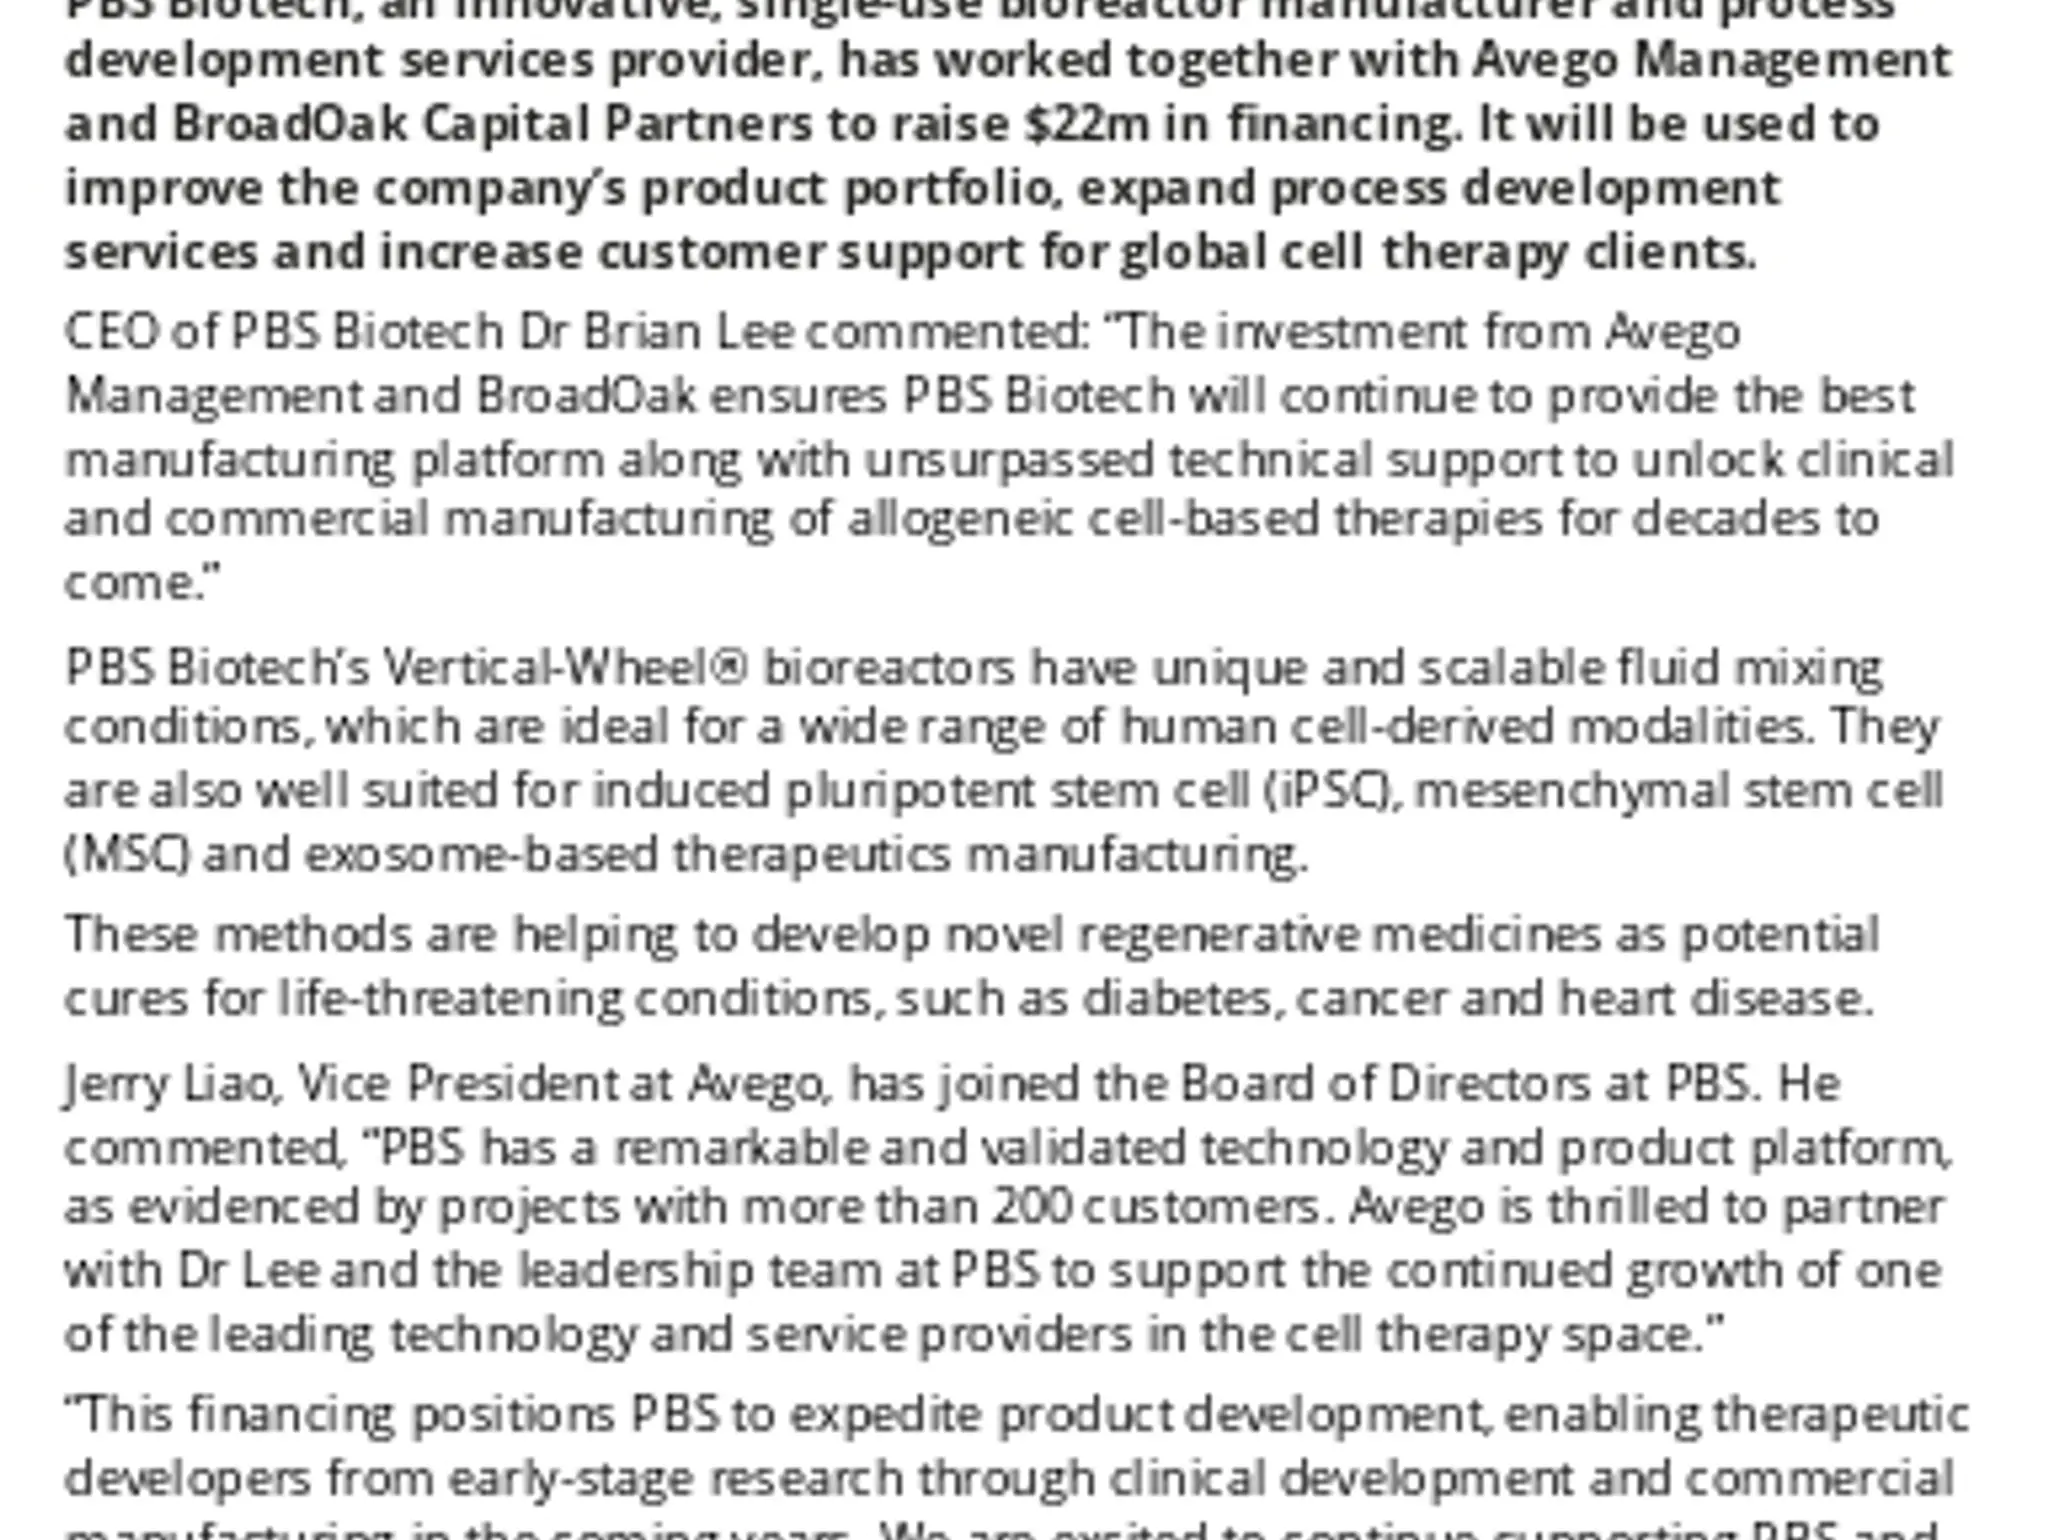 PBS Biotech raisies $22m To Expand Single-use Manufacturing Products & Services For Cell Therapies